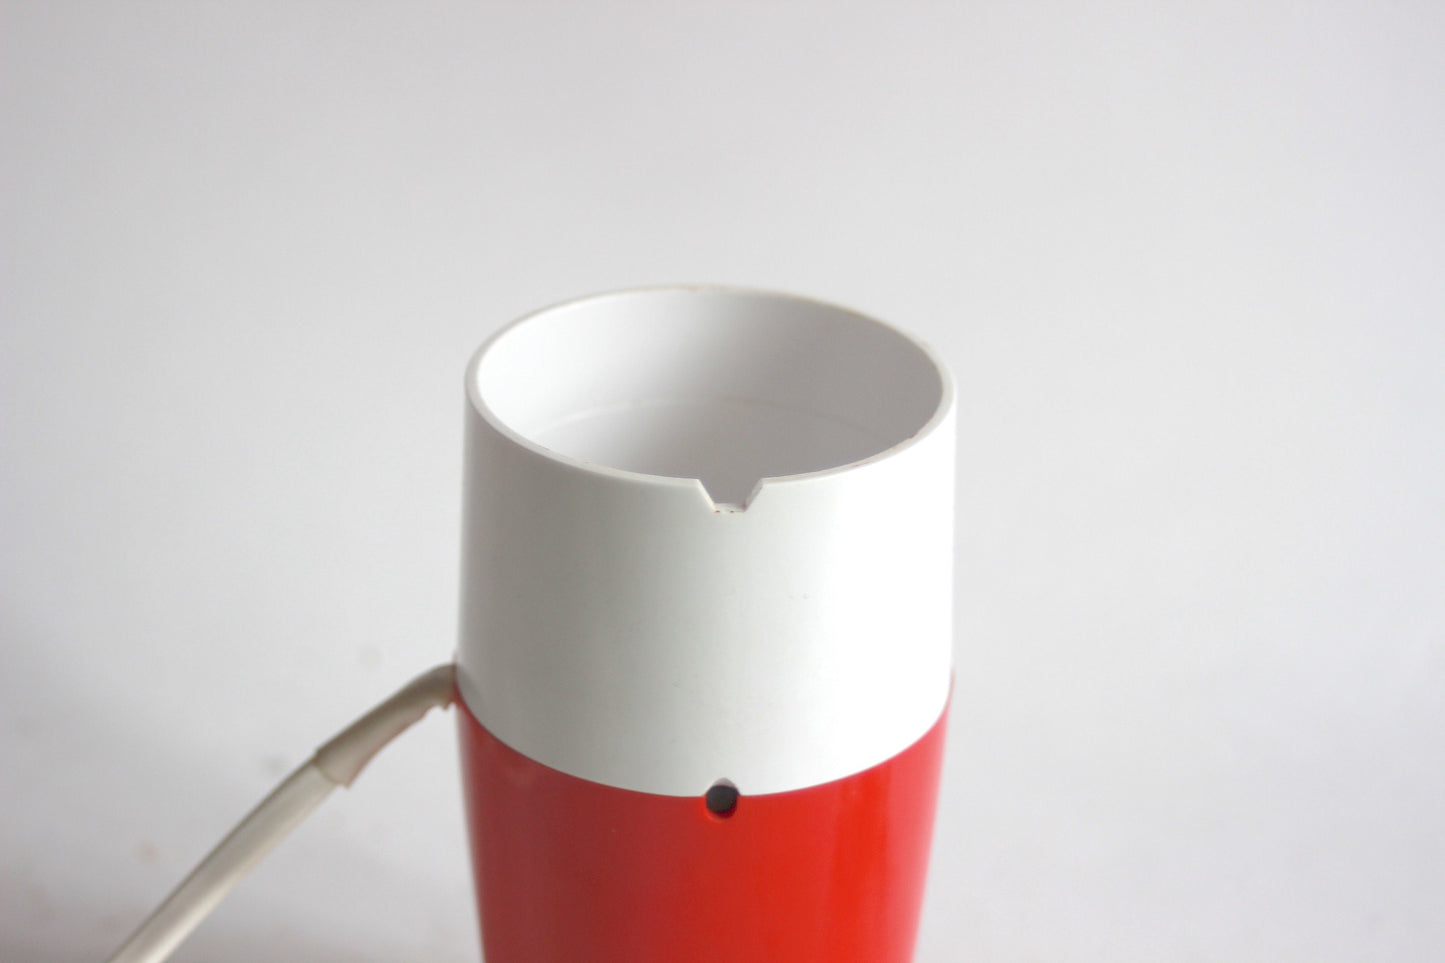 PHILIPS Coffee grinder HA2765A Red and white. 60s Space Age. Midcentury. minimalist design